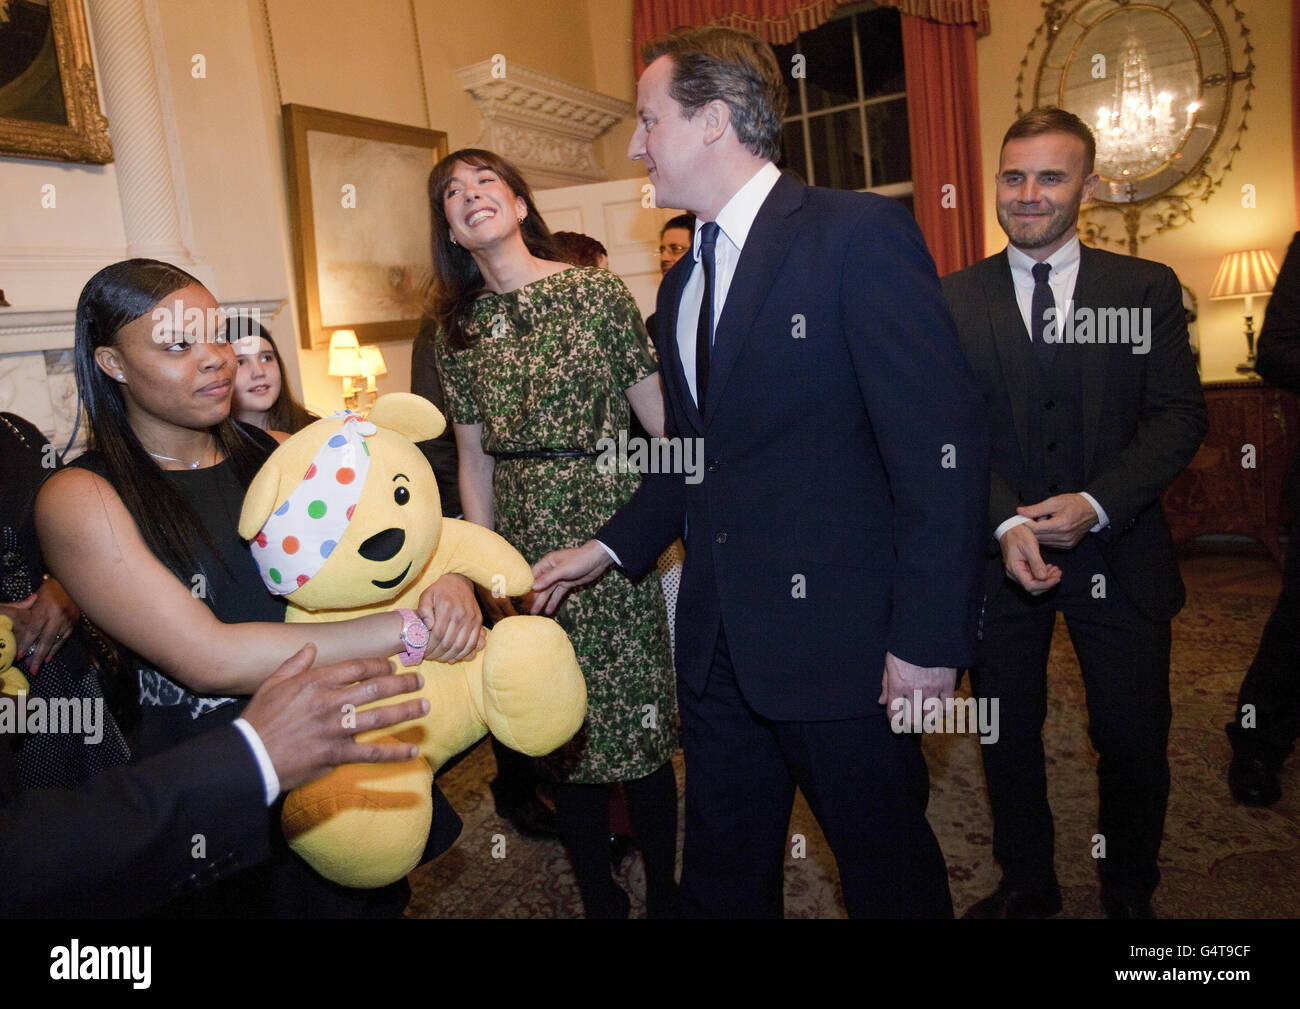 Prime Minister David Cameron, wife Samantha, second left, and singer Gary Barlow, right, meet guests during a reception at 10 Downing street for supporters and beneficiaries of the BBC's Children in Need charity. Stock Photo